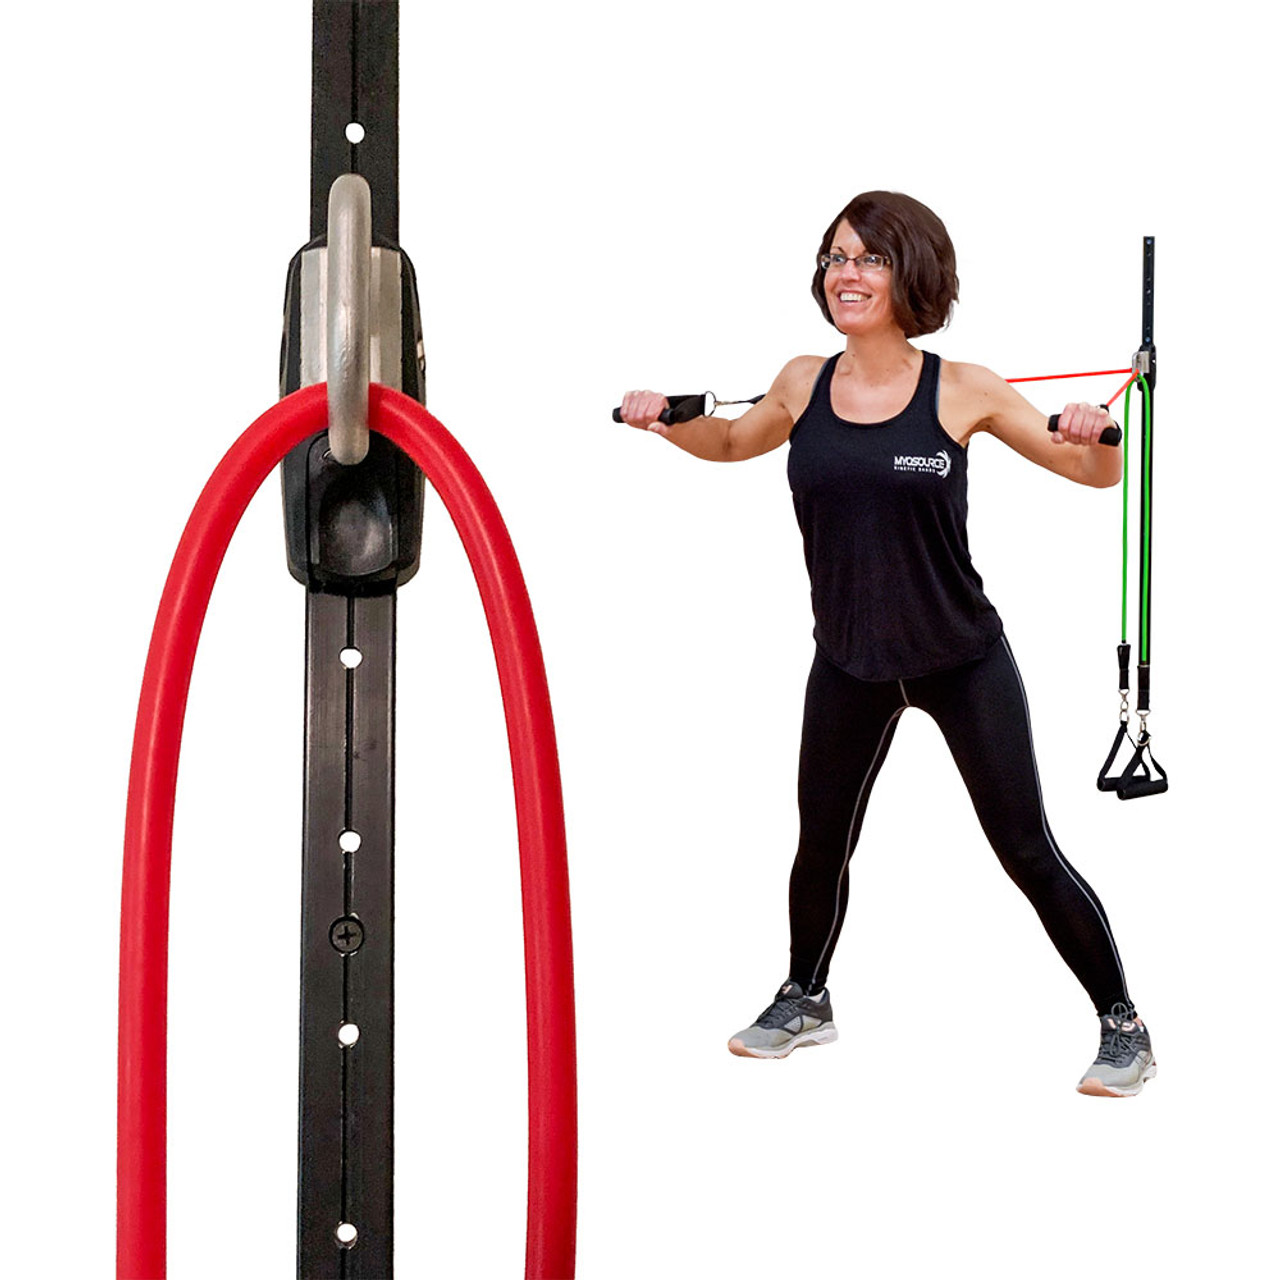 exercise bands, exercise resistance bands, fitness bands